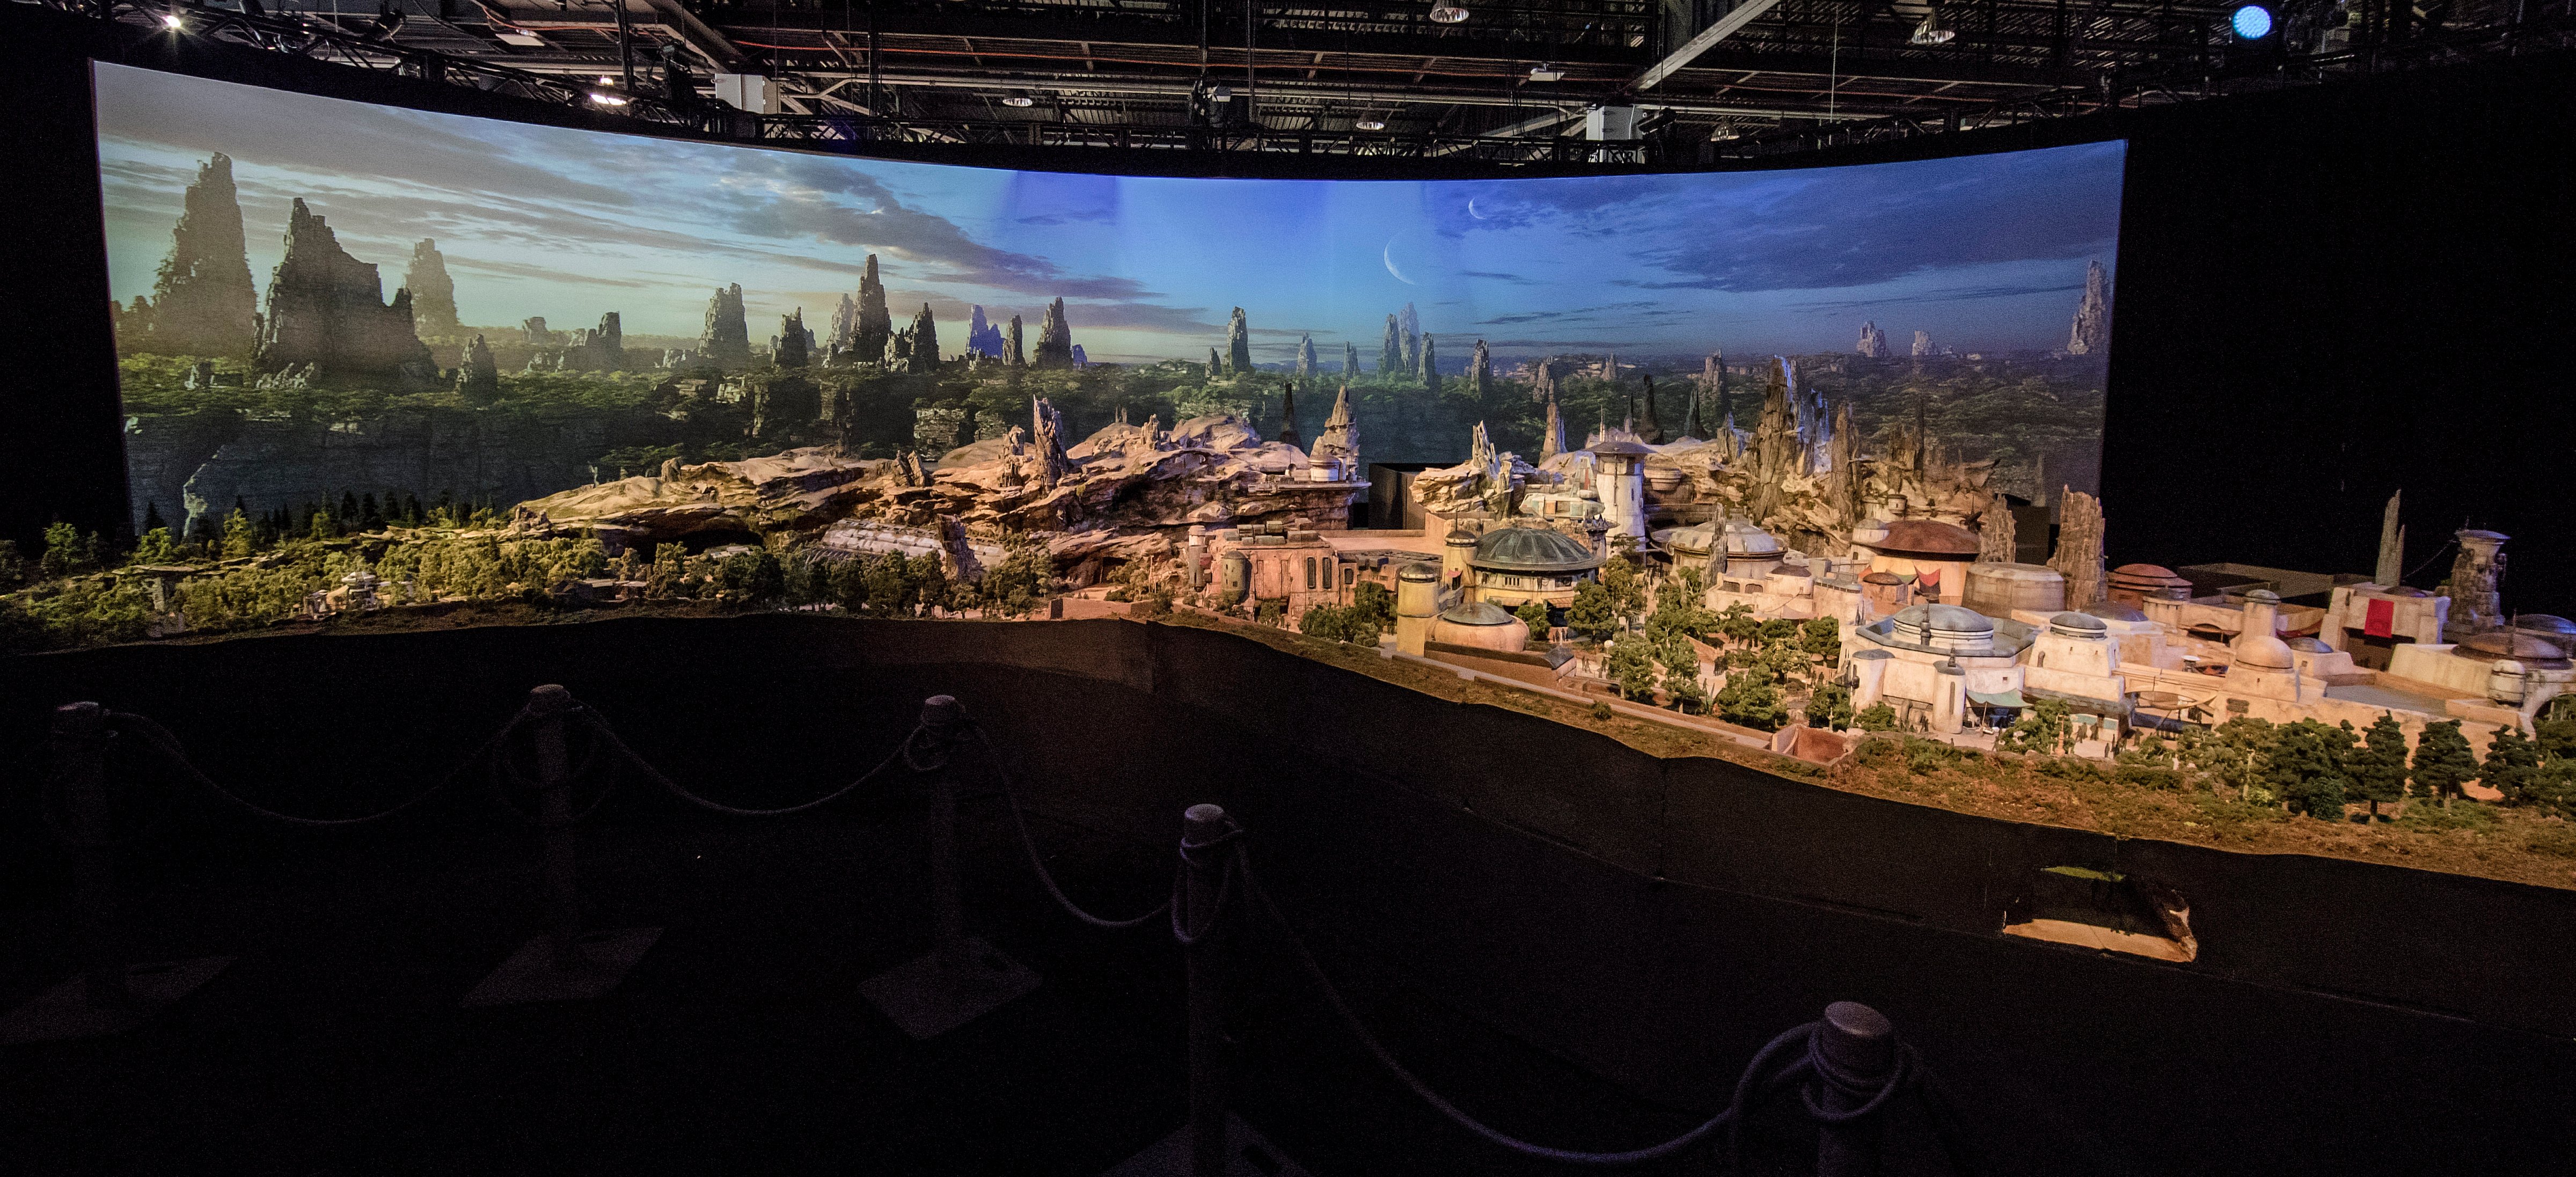 The fully detailed model of the Star Wars-themed park, under development at Disneyland in Anaheim, Calif., remains on display in Walt Disney Parks and Resorts 'A Galaxy of Stories' pavilion throughout D23 Expo at the Anaheim Convention Center. The exhibition gives D23 Expo guests an up-close look at what's to come on this never-before seen planet. (Joshua Sudock—Disneyland Resort)